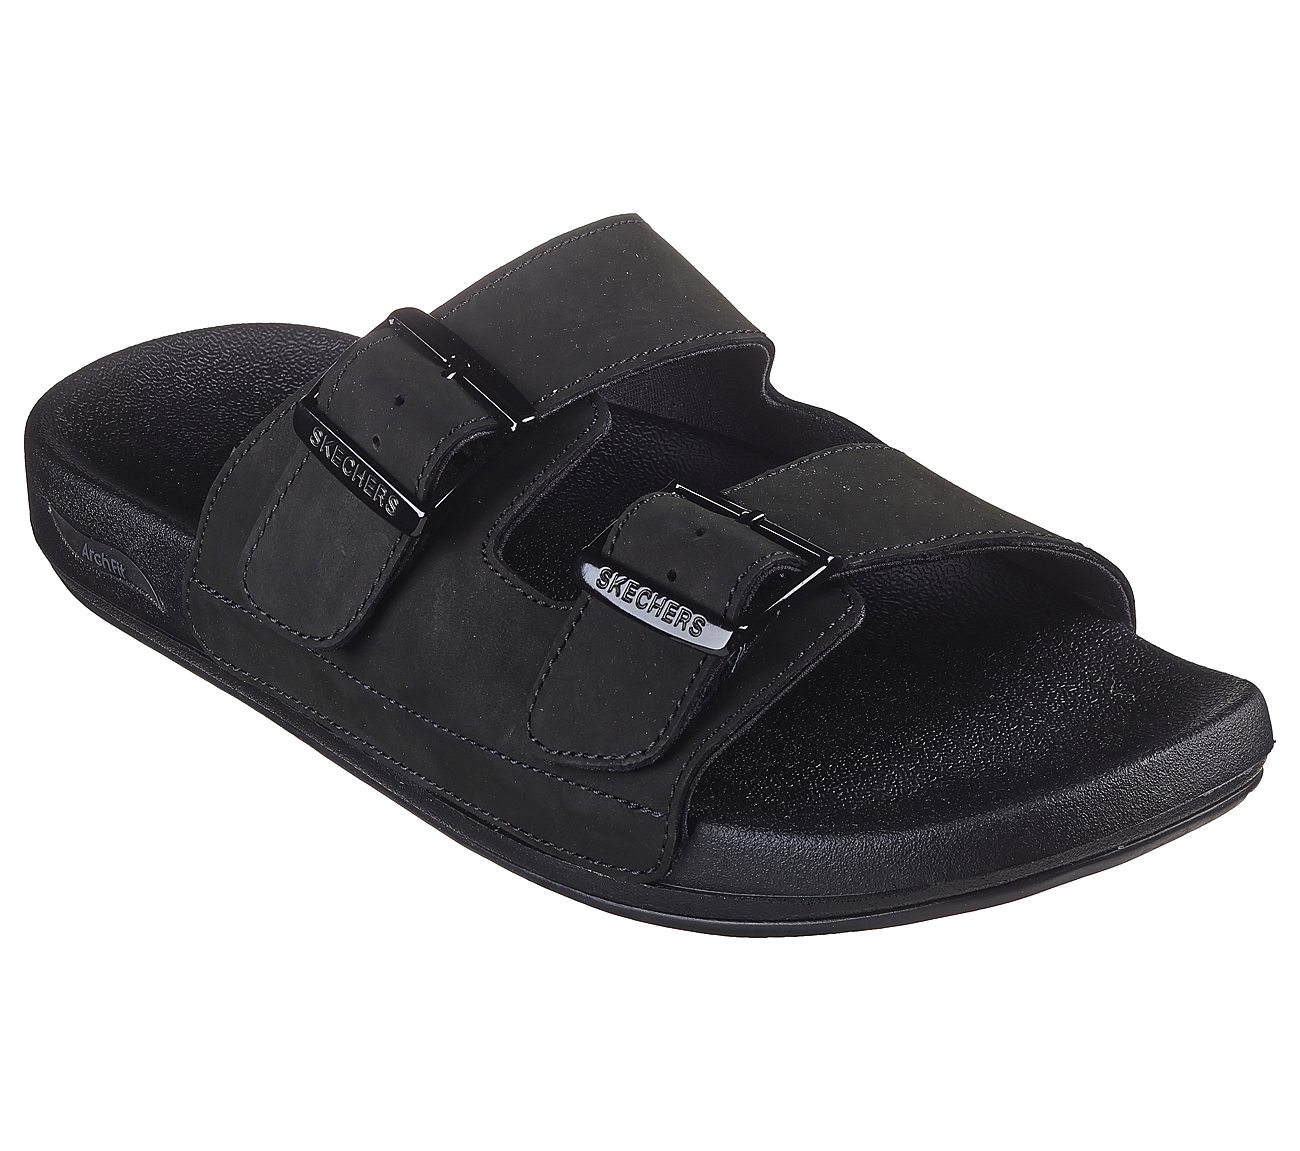 ARCH FIT PRO SANDAL, BBLACK Footwear Right View